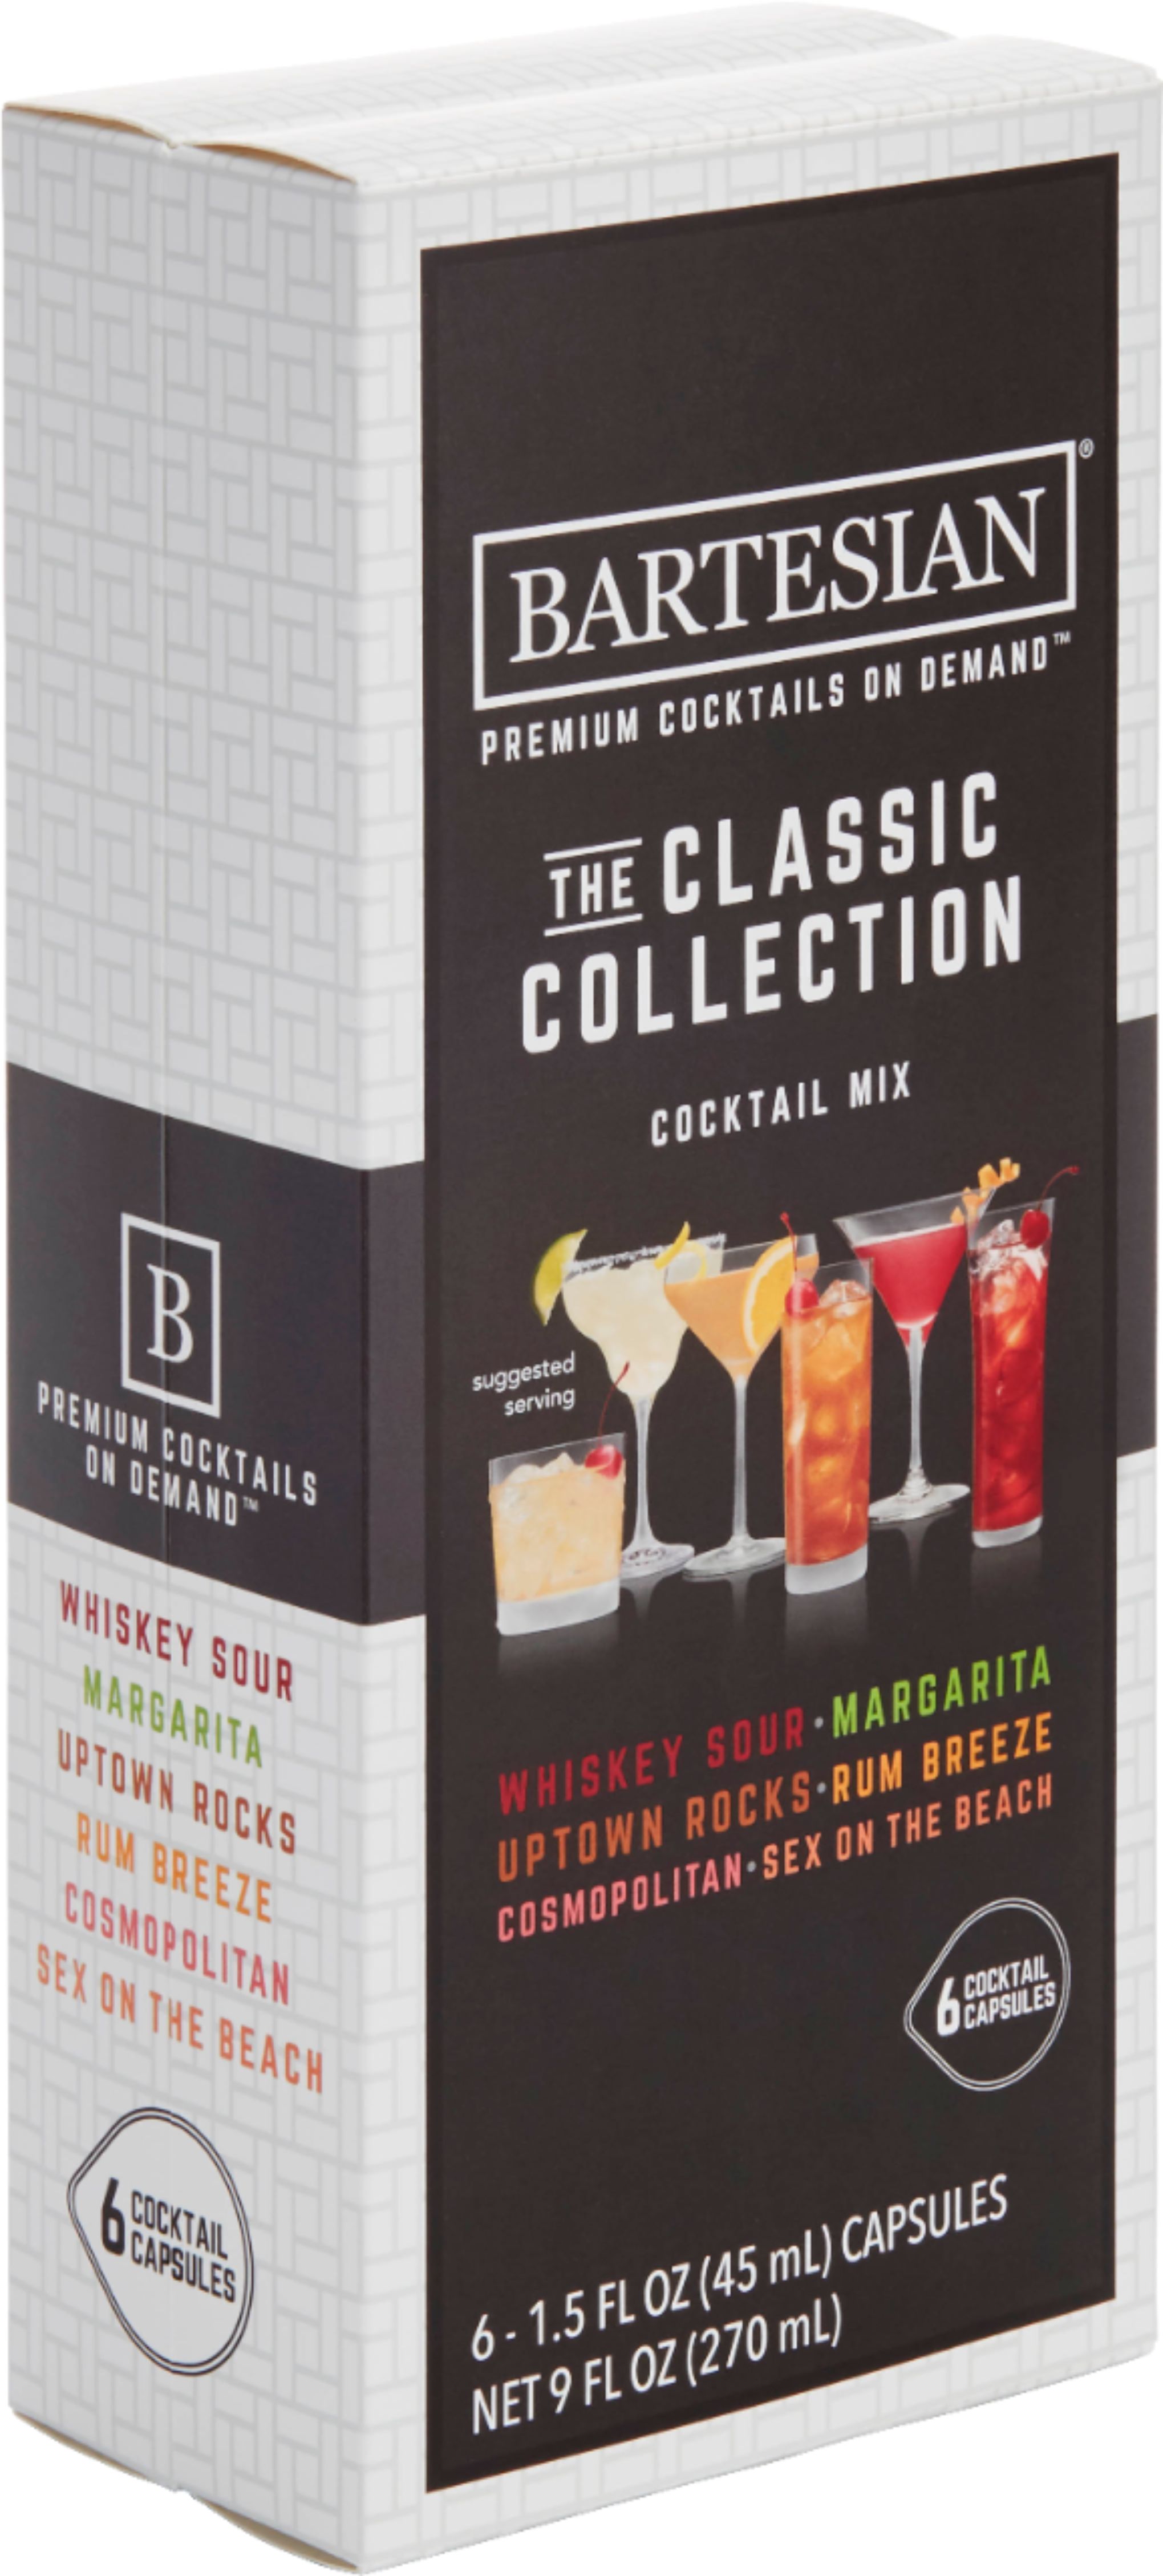 Bartesian Cosmopolitan, Margarita, and Old Fashioned Cocktail Mixer  Capsules, Pack of 18 Cocktail Capsules, for Bartesian Premium Cocktail  Maker